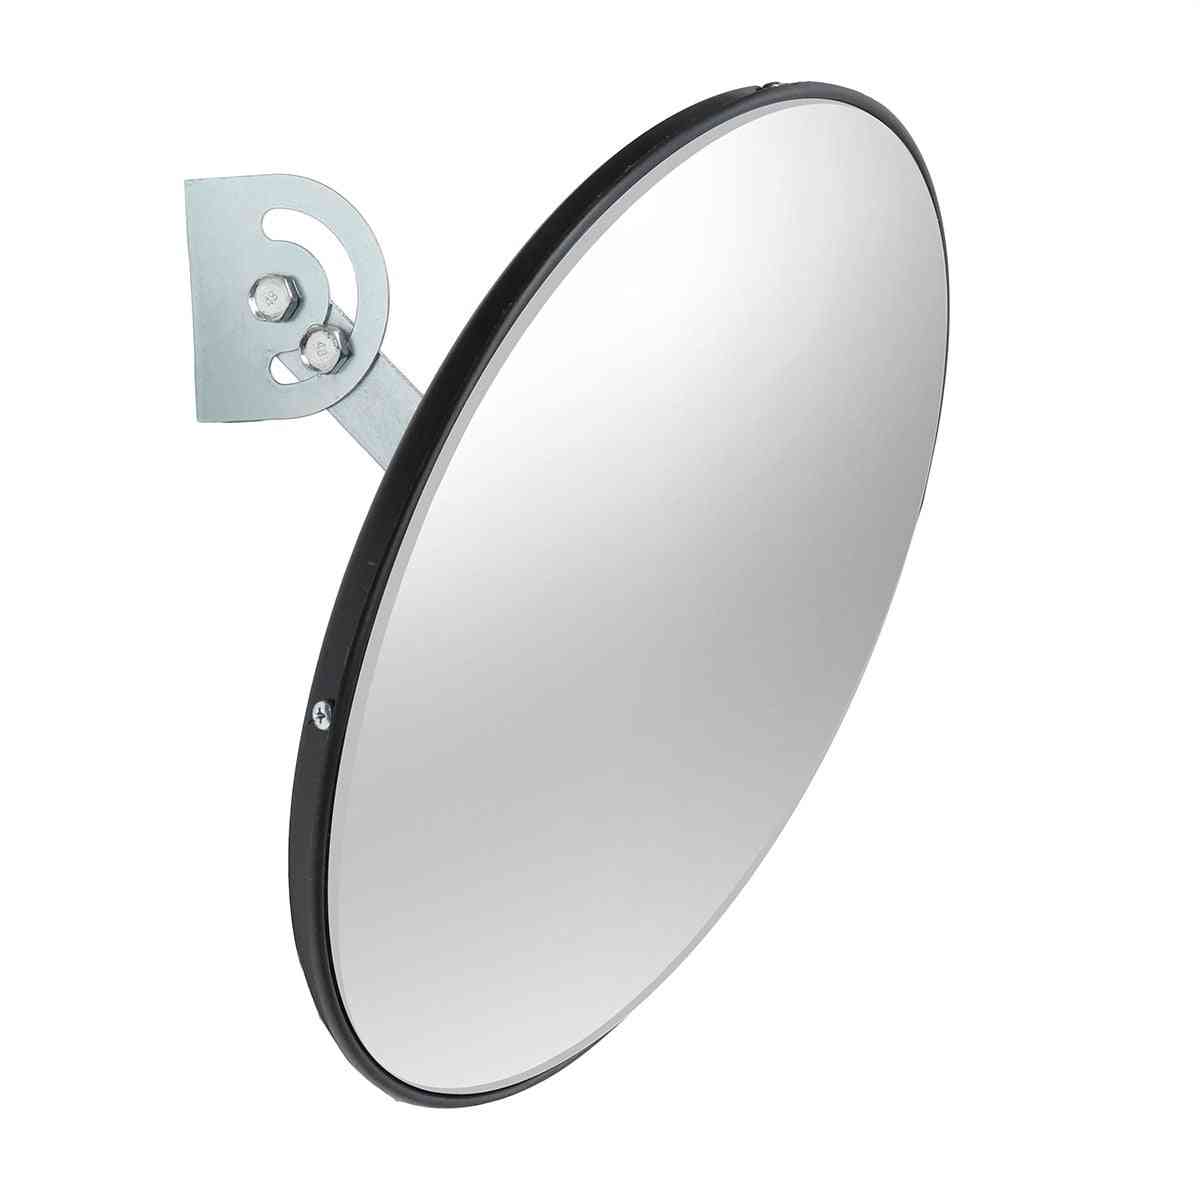 Wide Angle, Curved Convex, Security Road Mirror For Indoor Burglar